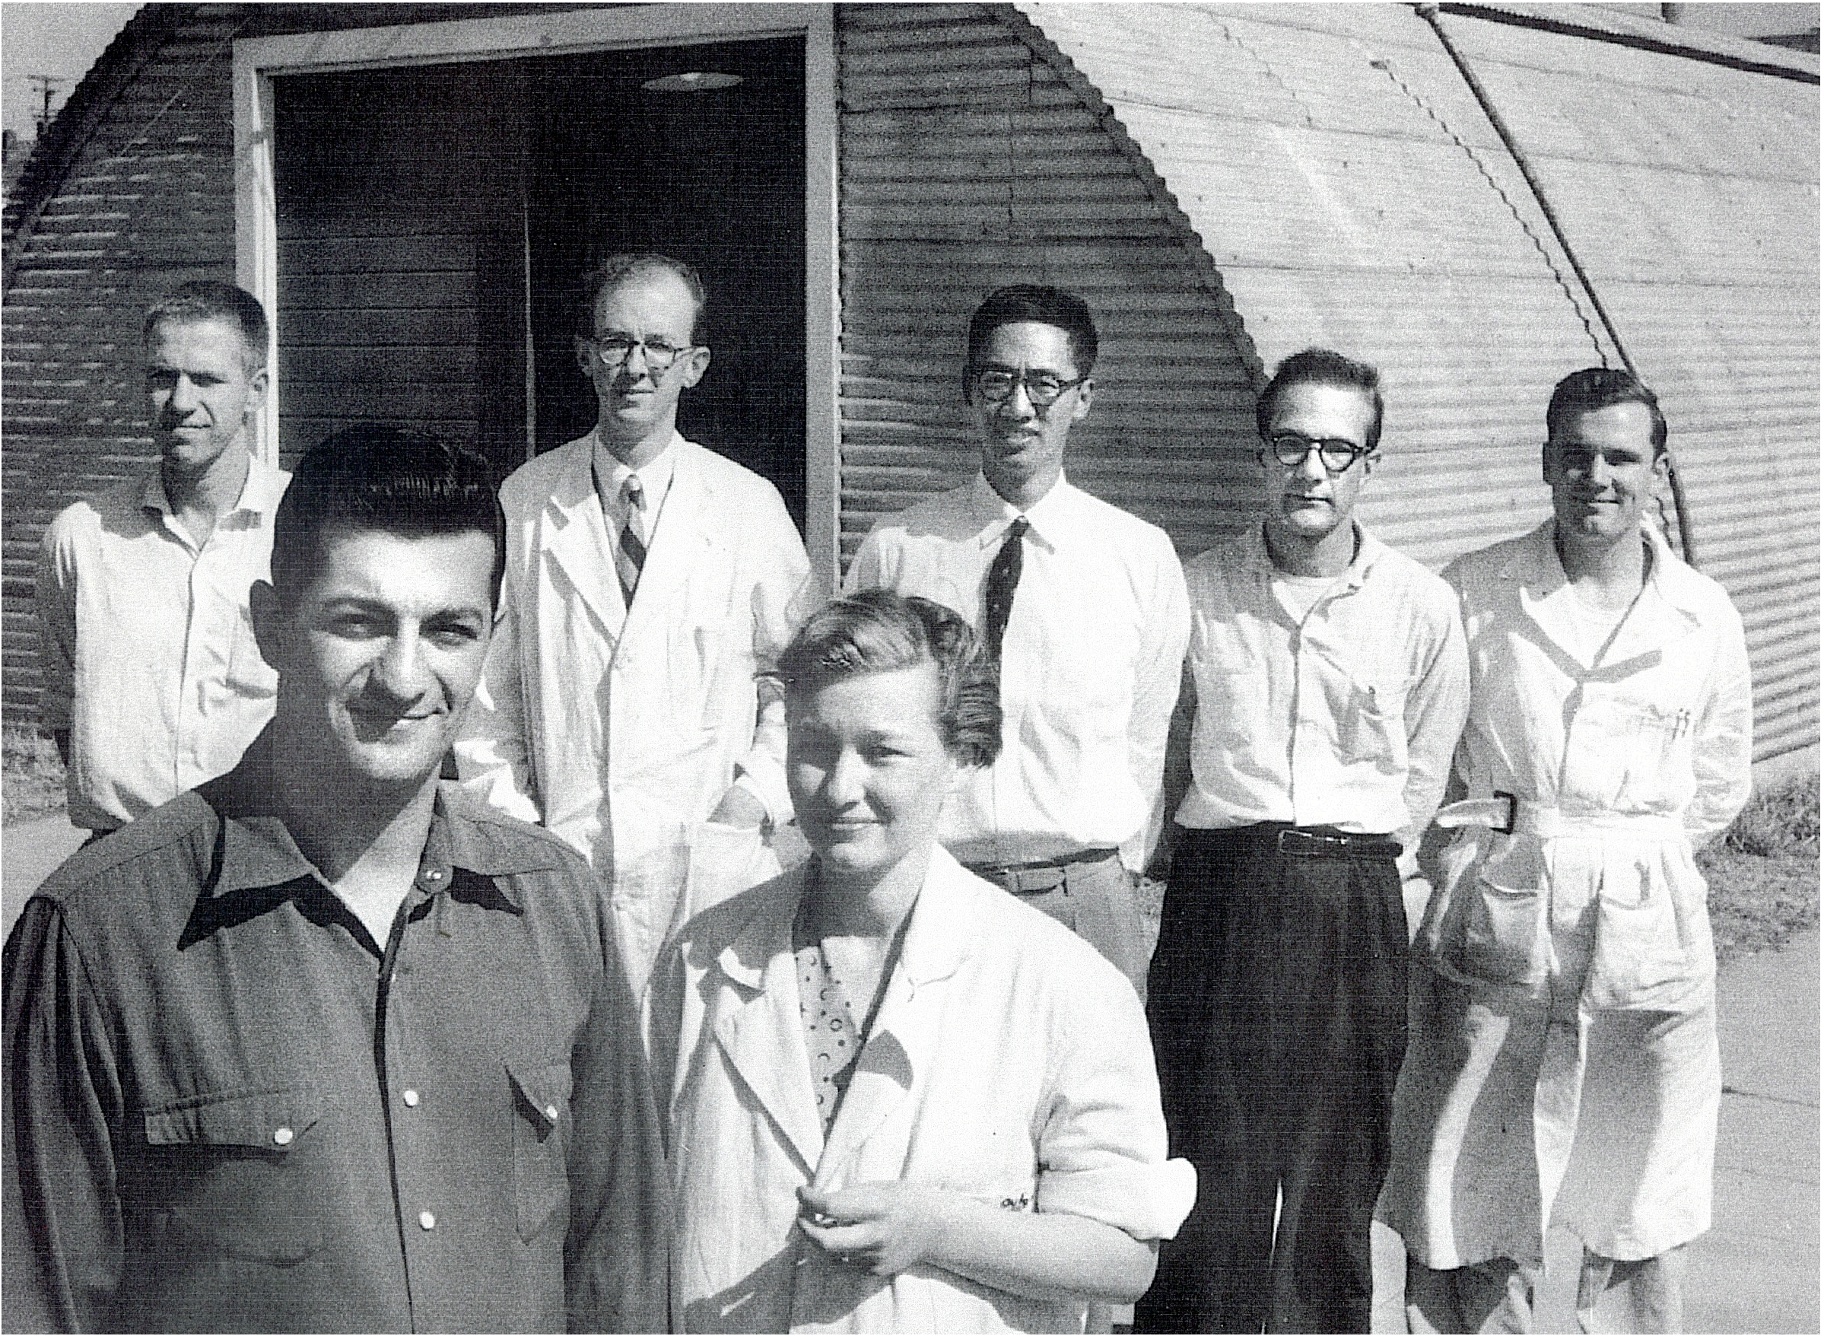 Black and white photograph of a young couple in the foreground, five people wearing lab coats in the middle ground, and a quonset hut in the background